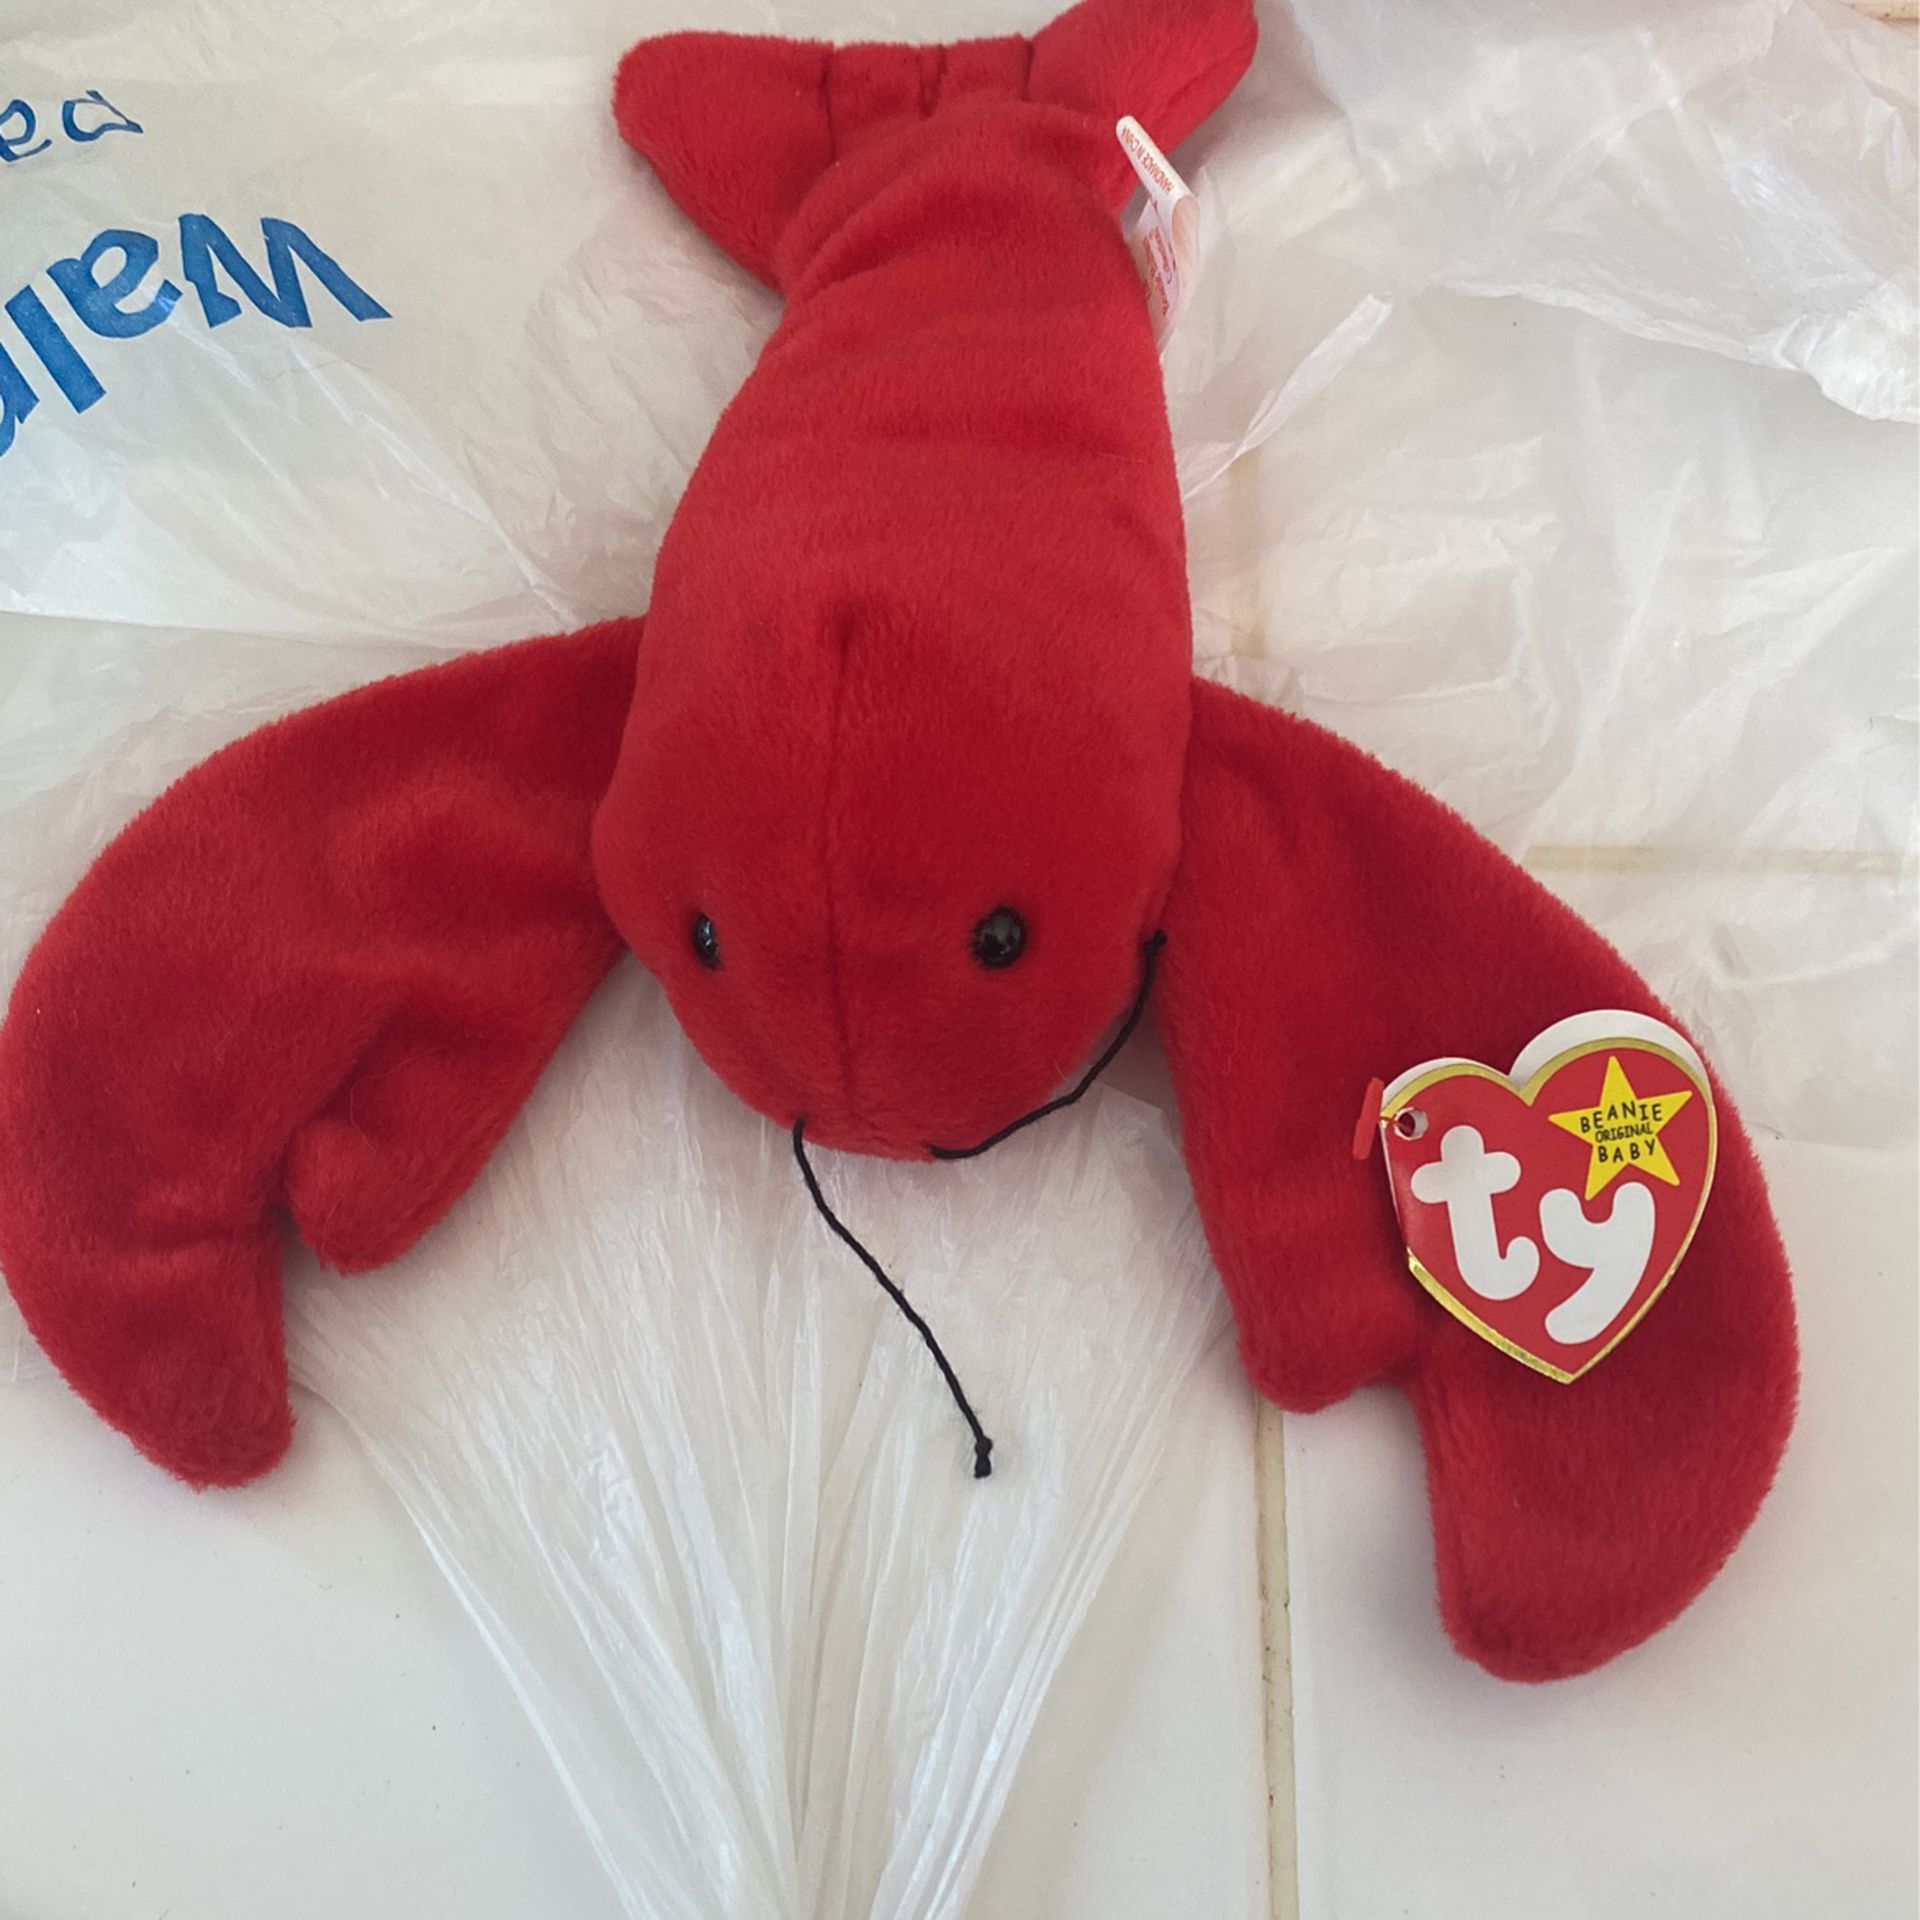 Pinchers The Lobster Beanie Baby Rare (retired) 1993 PVC Pellets In New Condition!